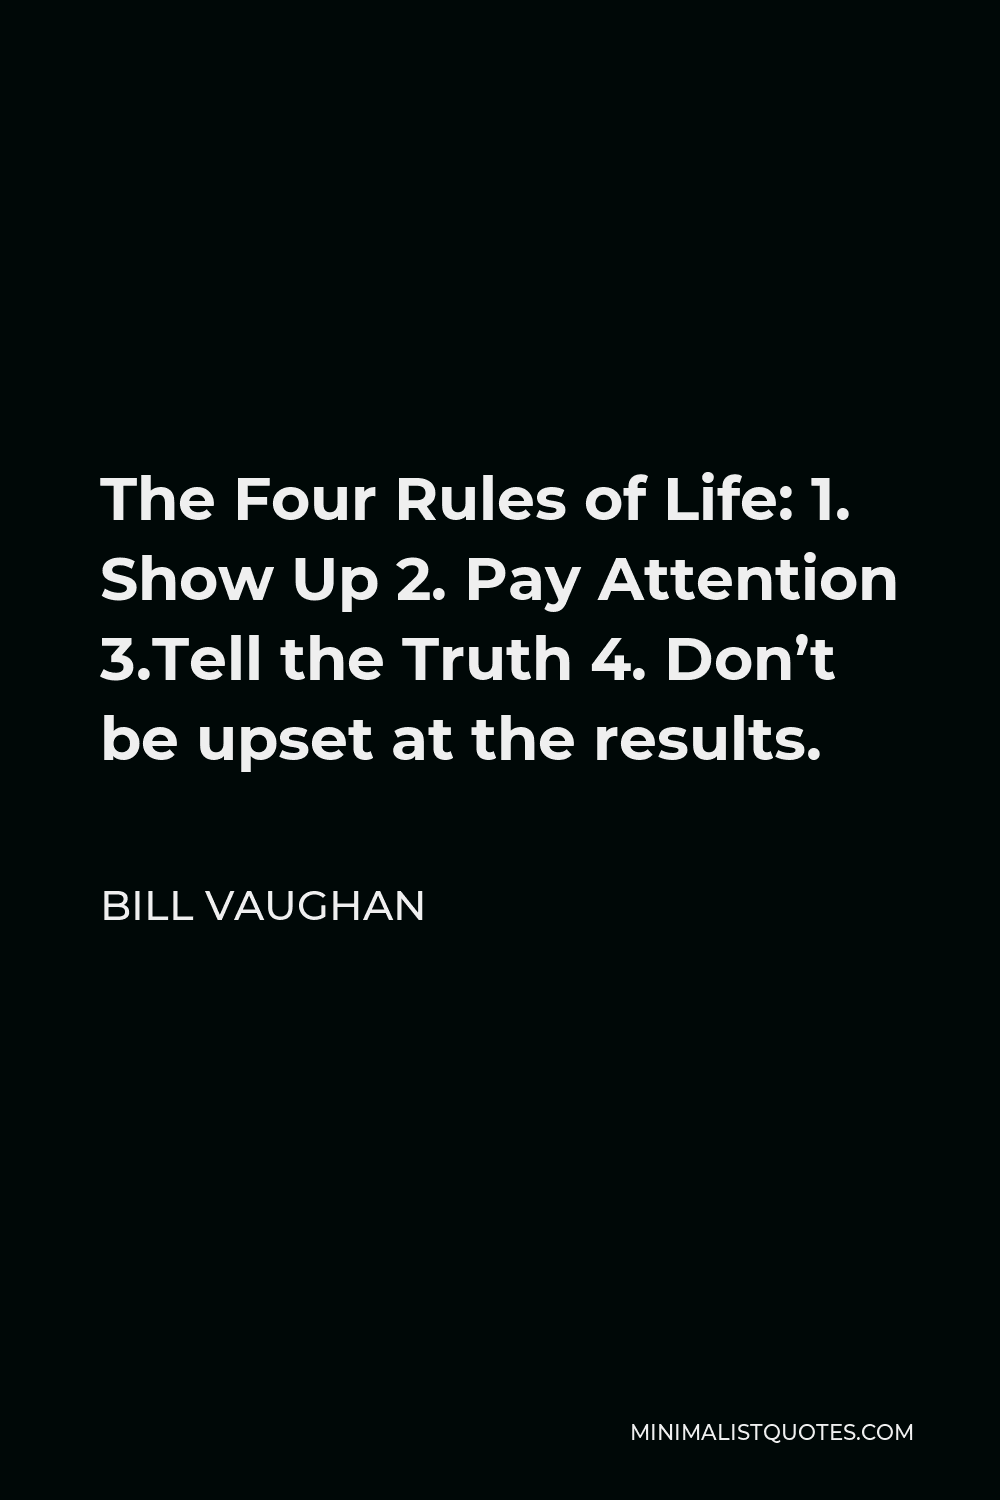 Bill Vaughan Quote - The Four Rules of Life: 1. Show Up 2. Pay Attention 3.Tell the Truth 4. Don’t be upset at the results.